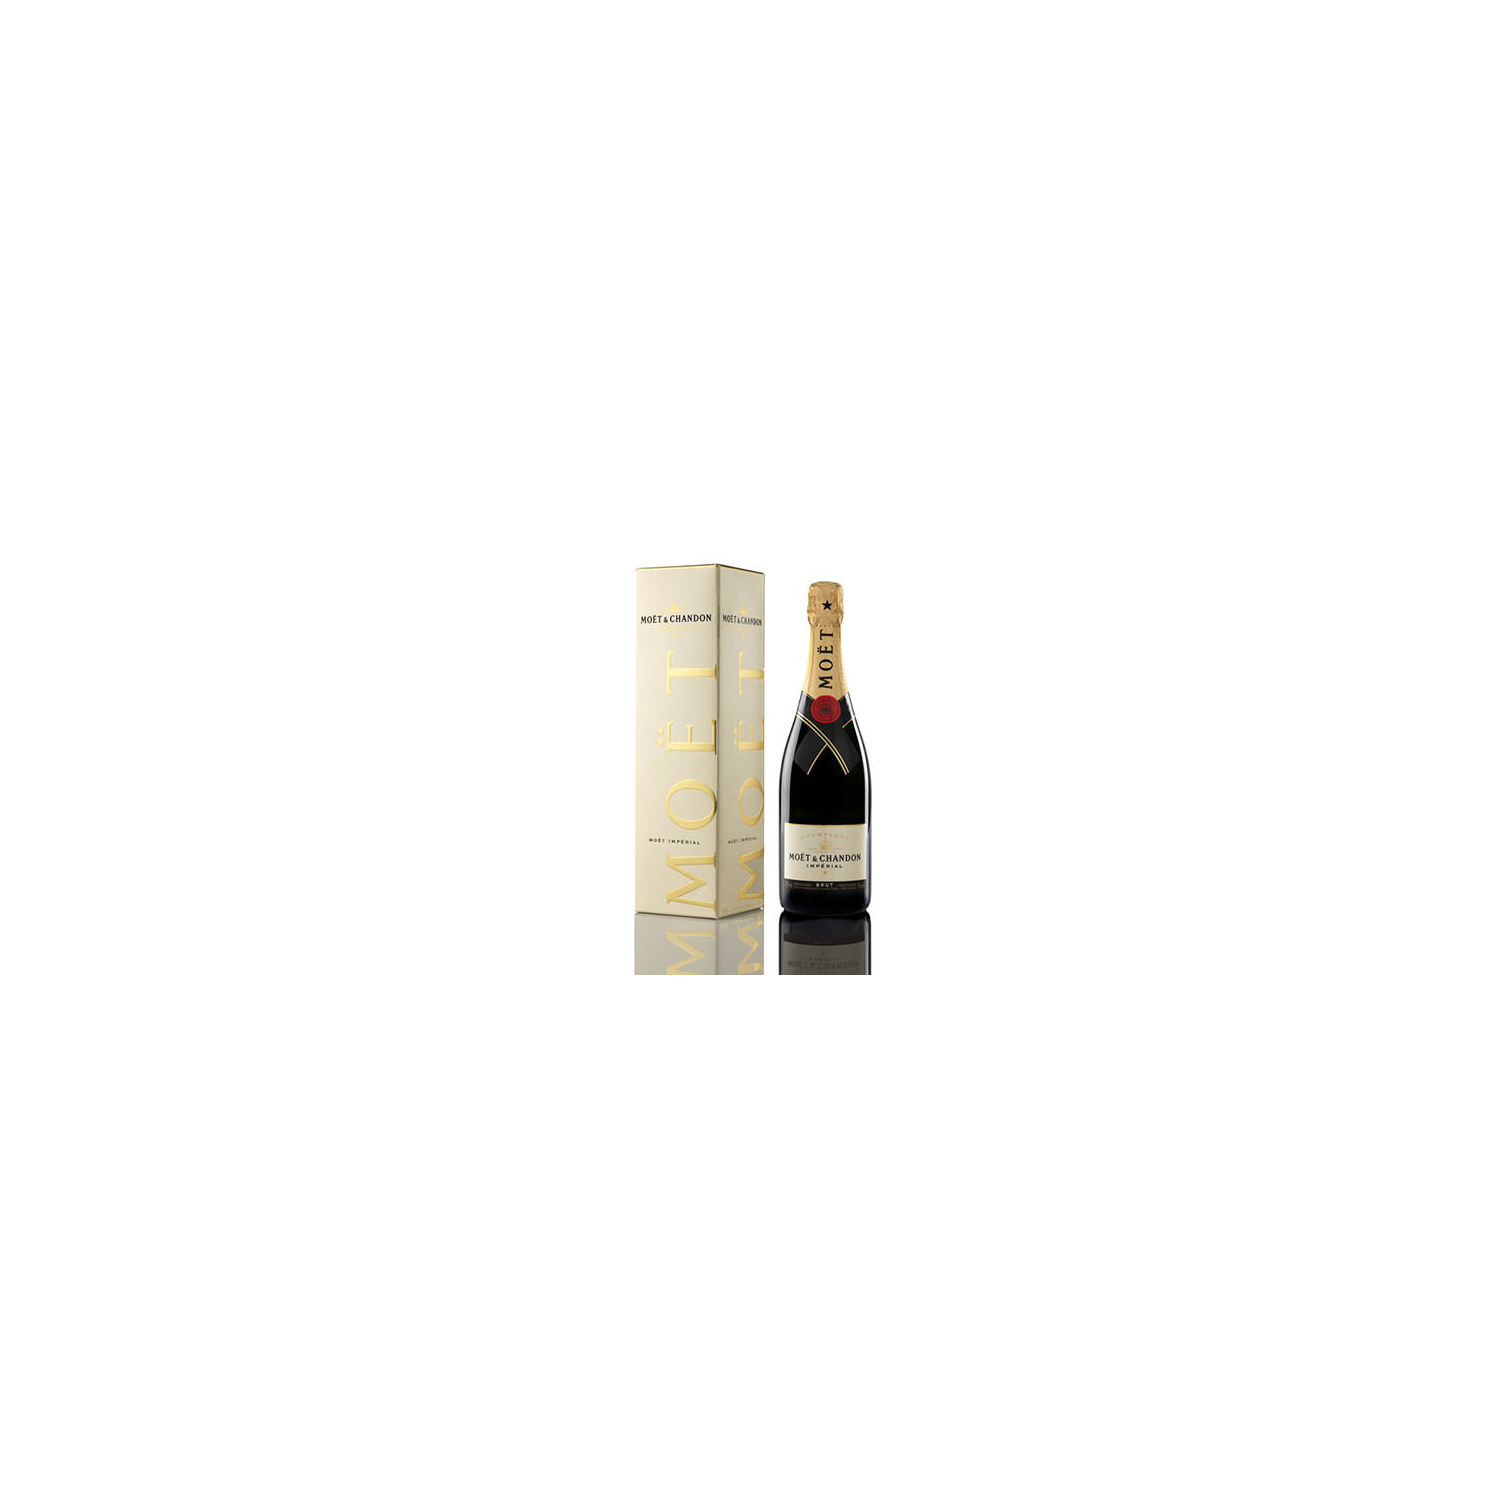 Imperial Champagne Gift Box 750ml